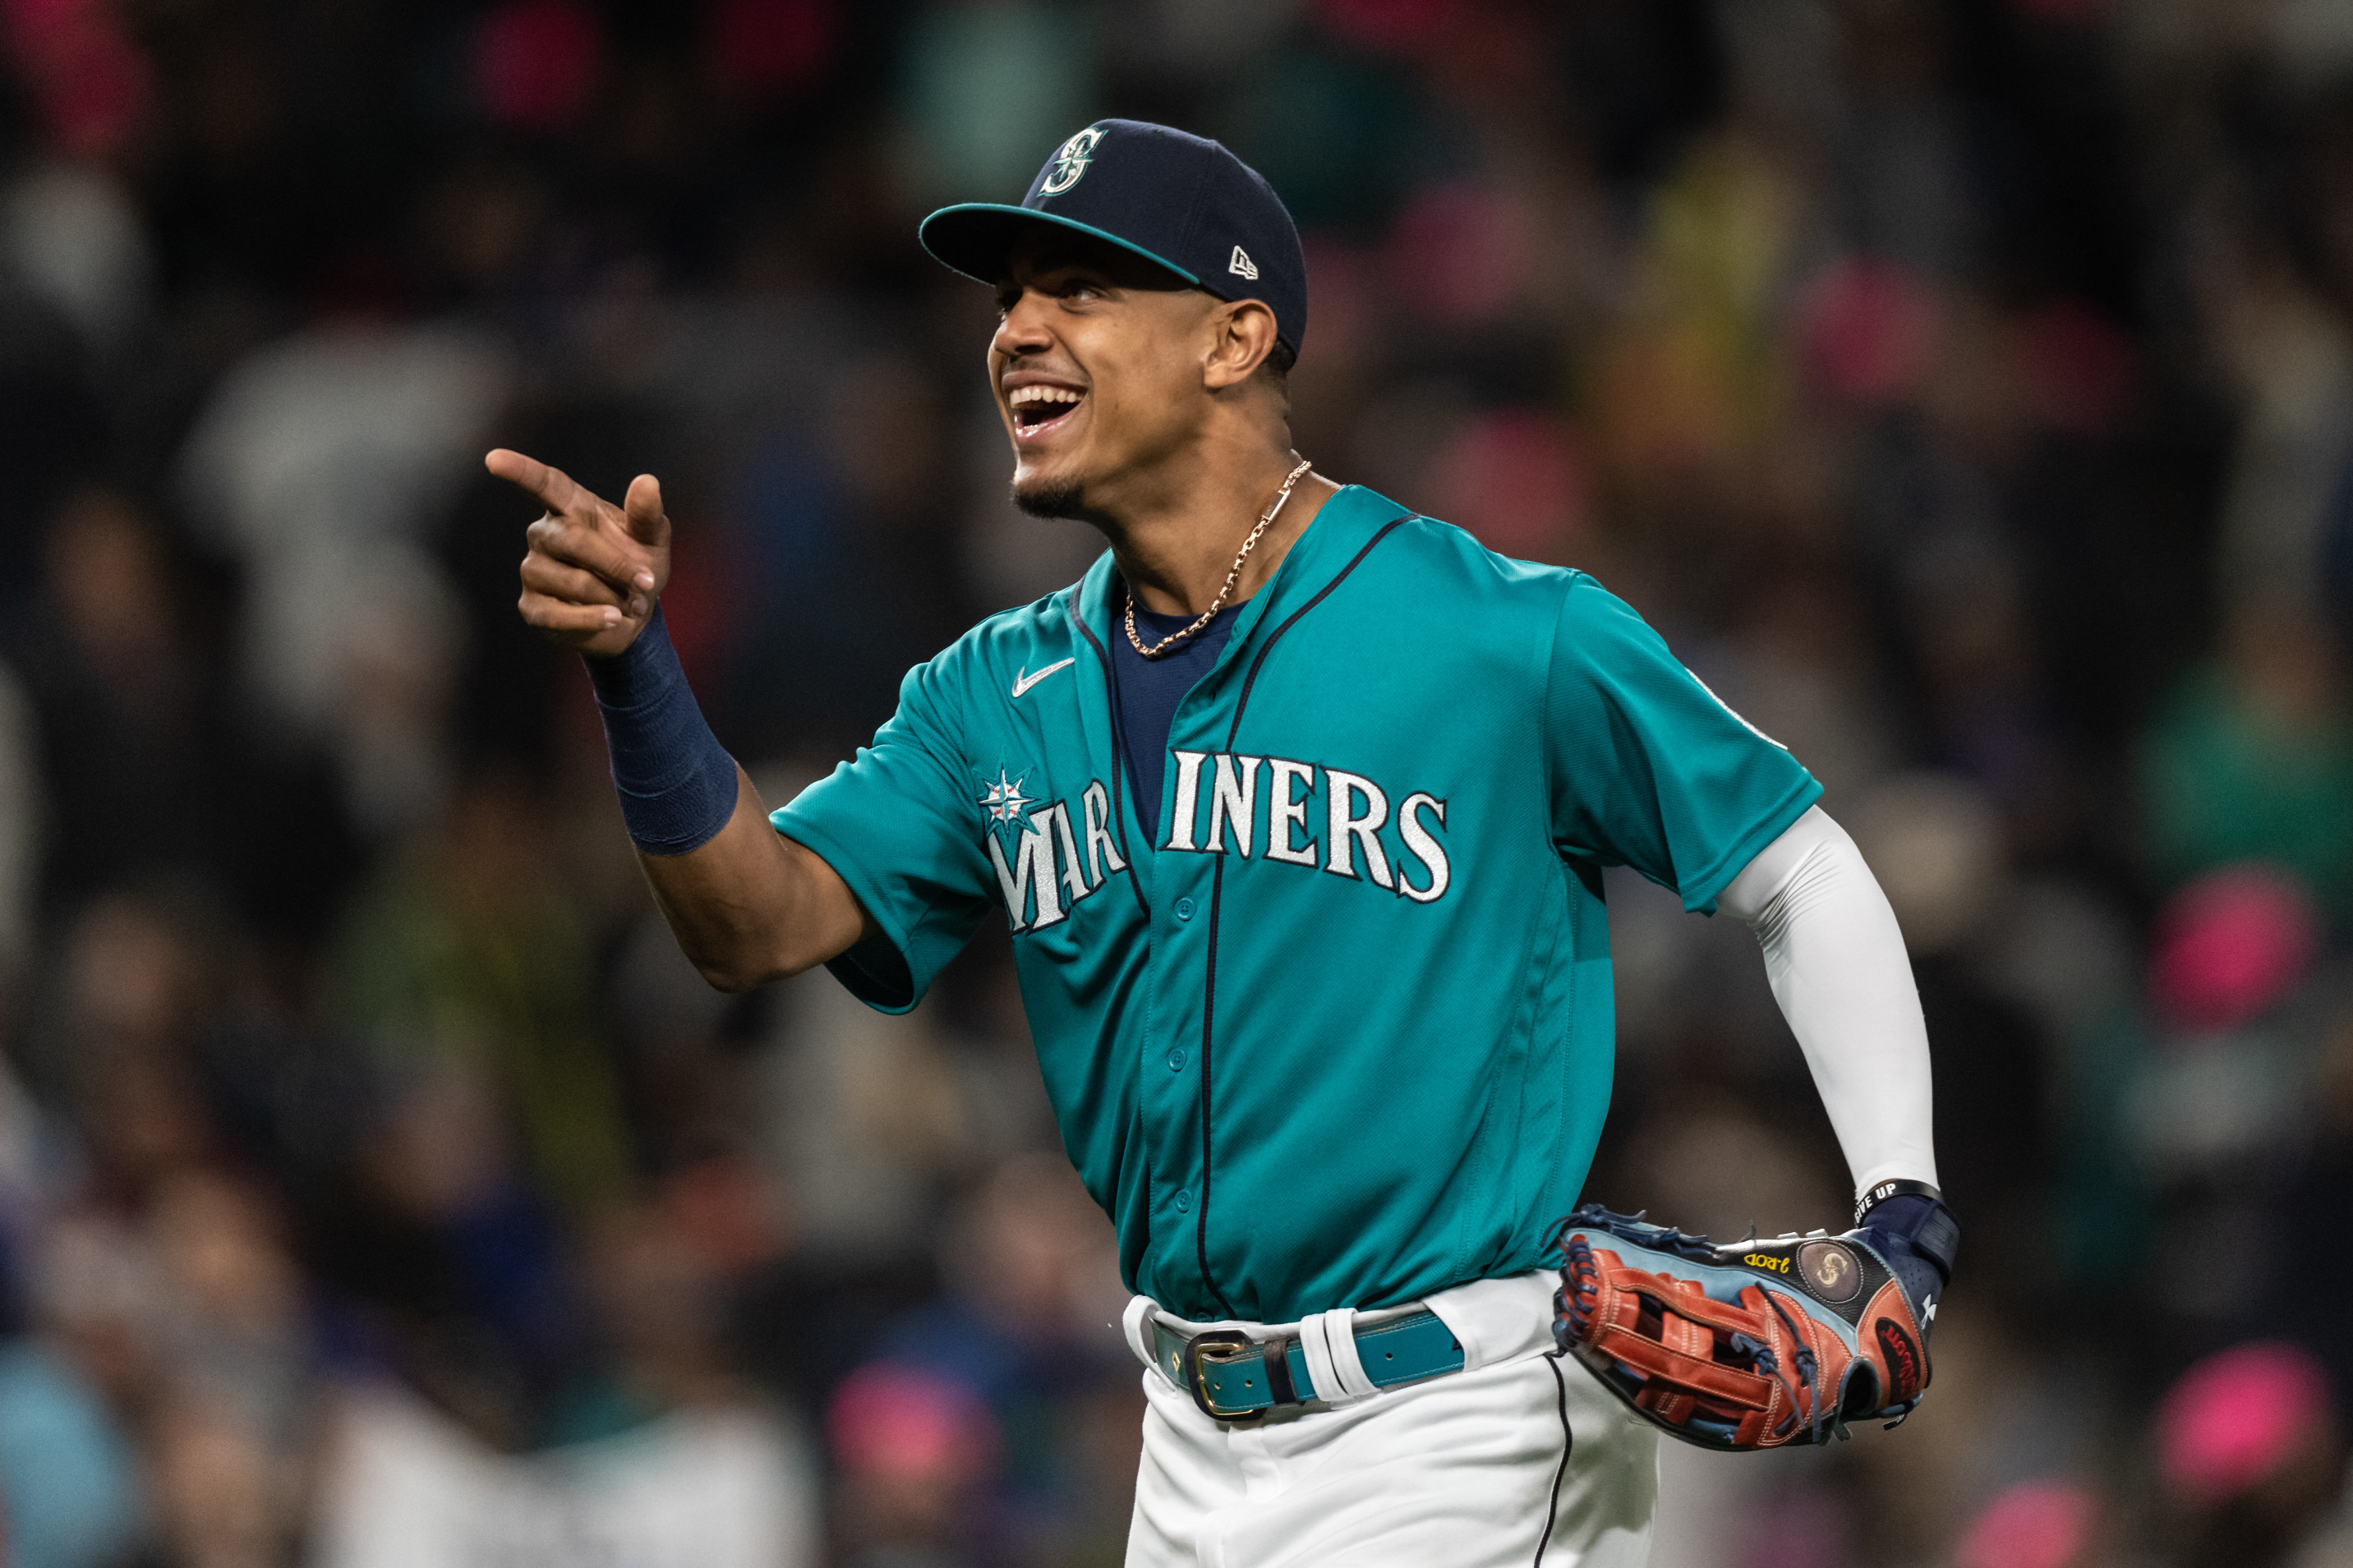 Mariners' new players embrace Seattle: 'Nothing but good vibes so